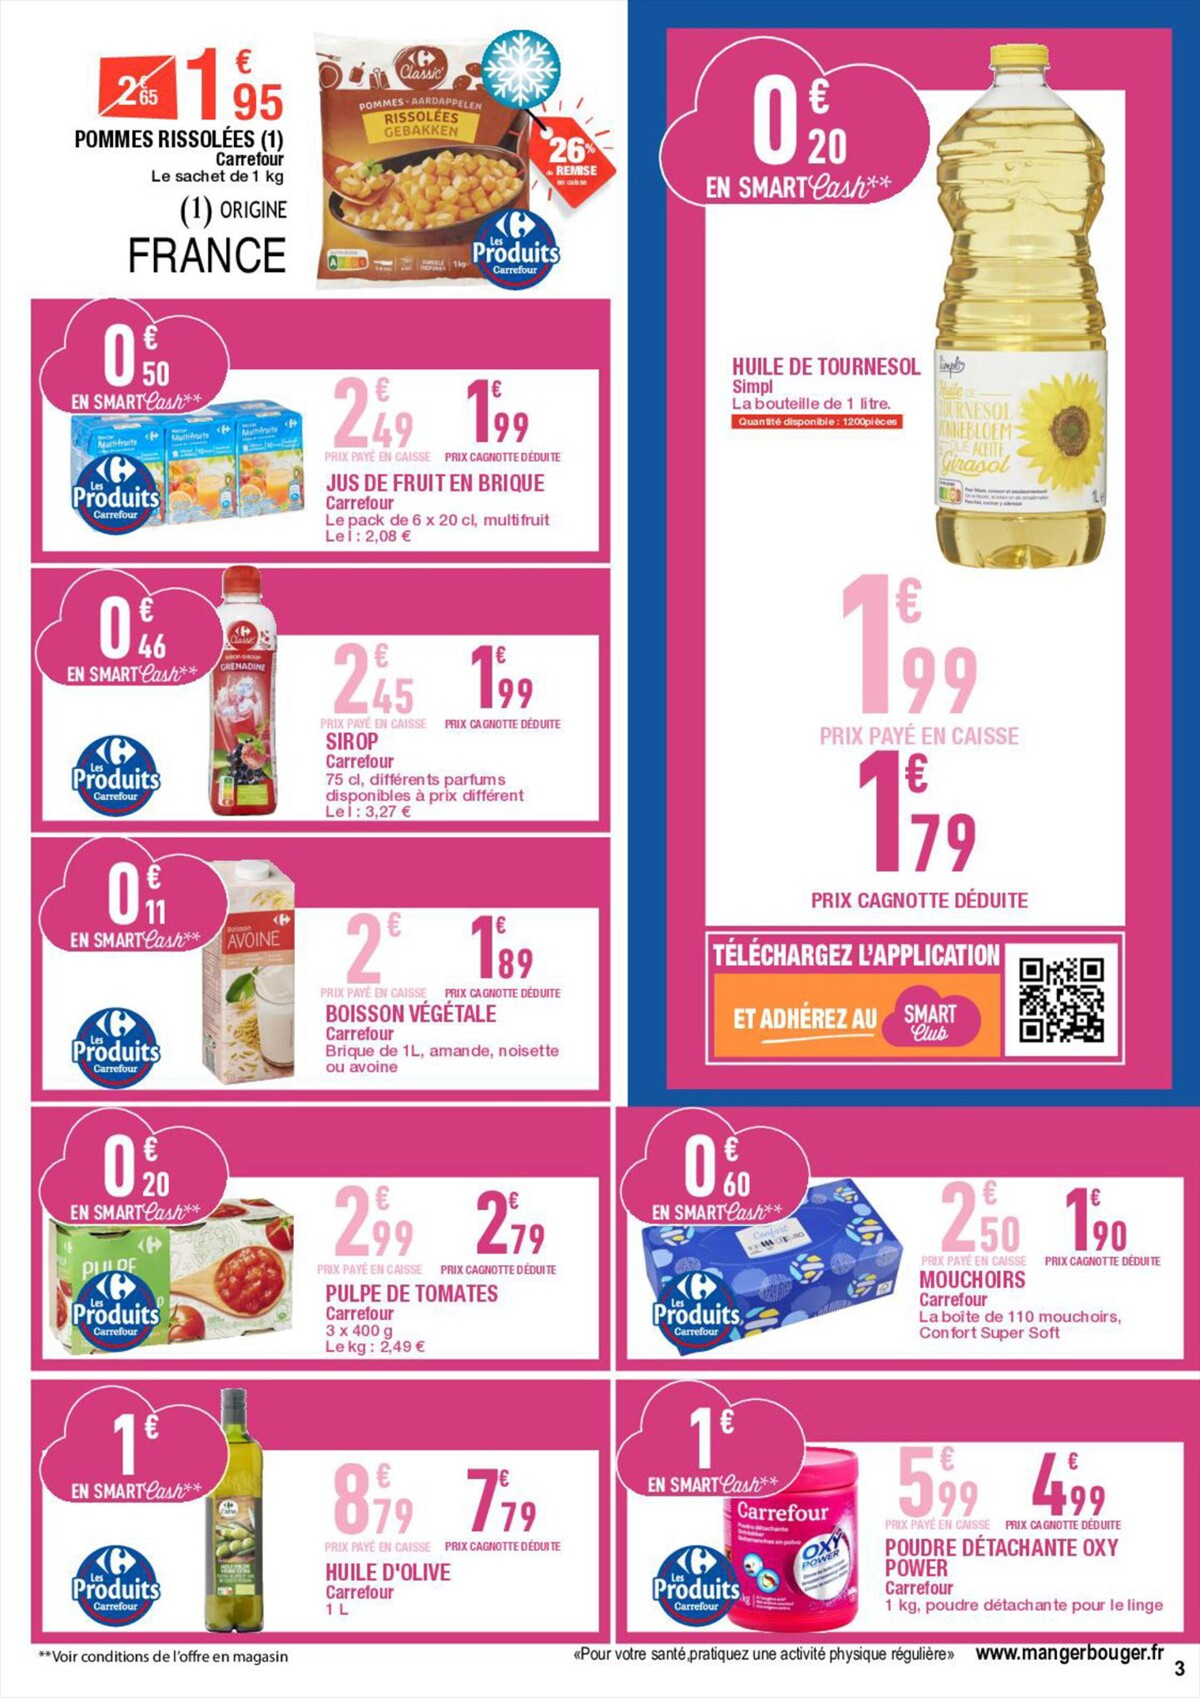 Catalogue Carrefour Special MDD, page 00003